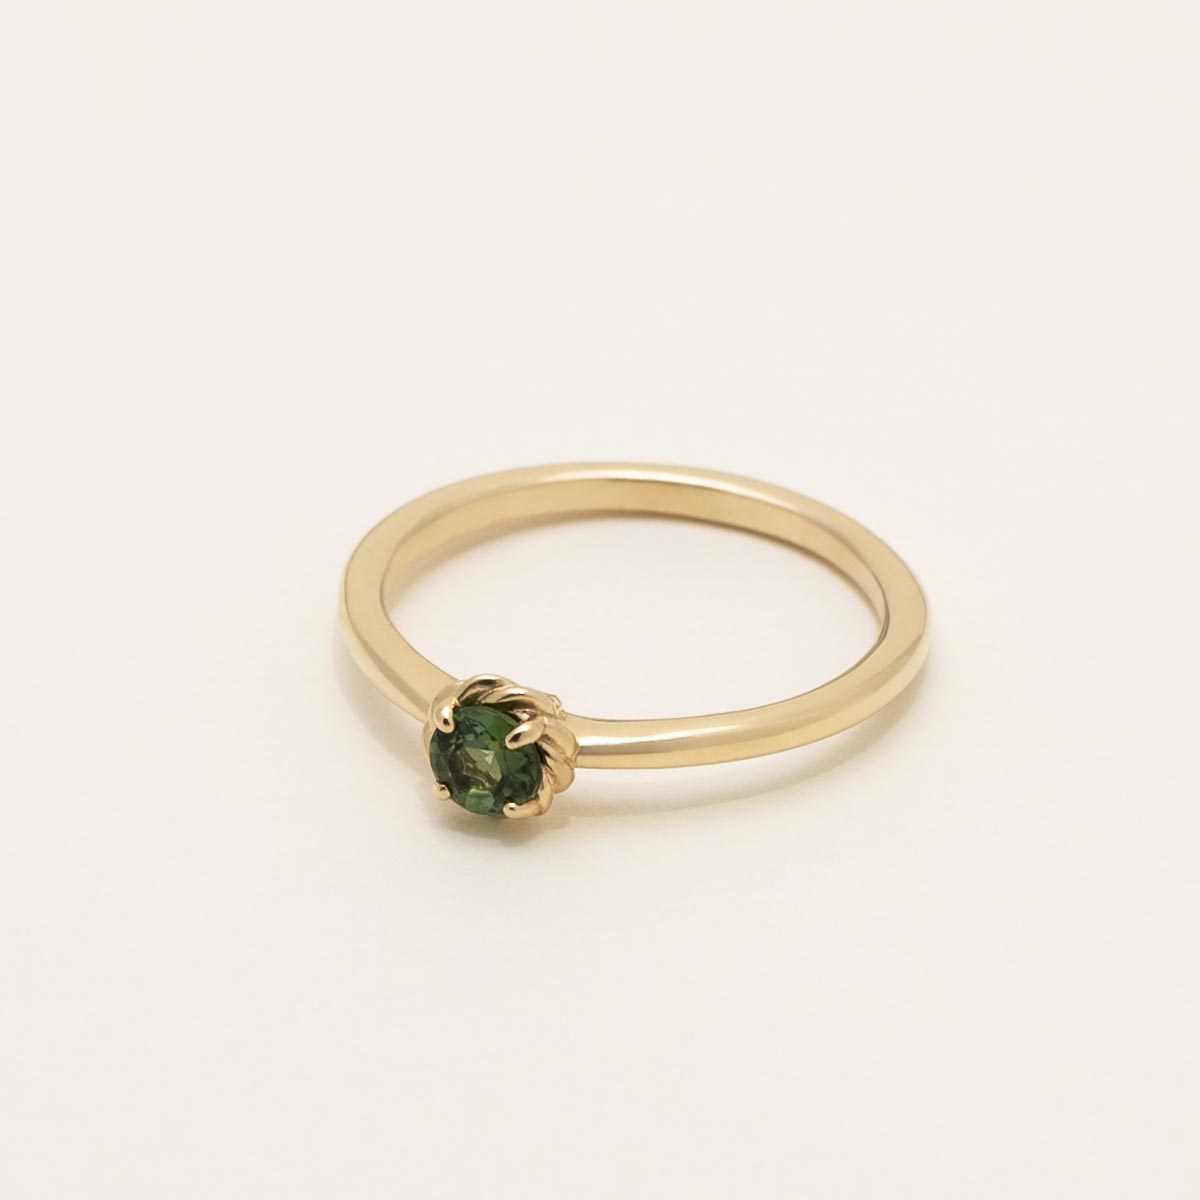 Maine Green Tourmaline Ring in 14kt Yellow Gold